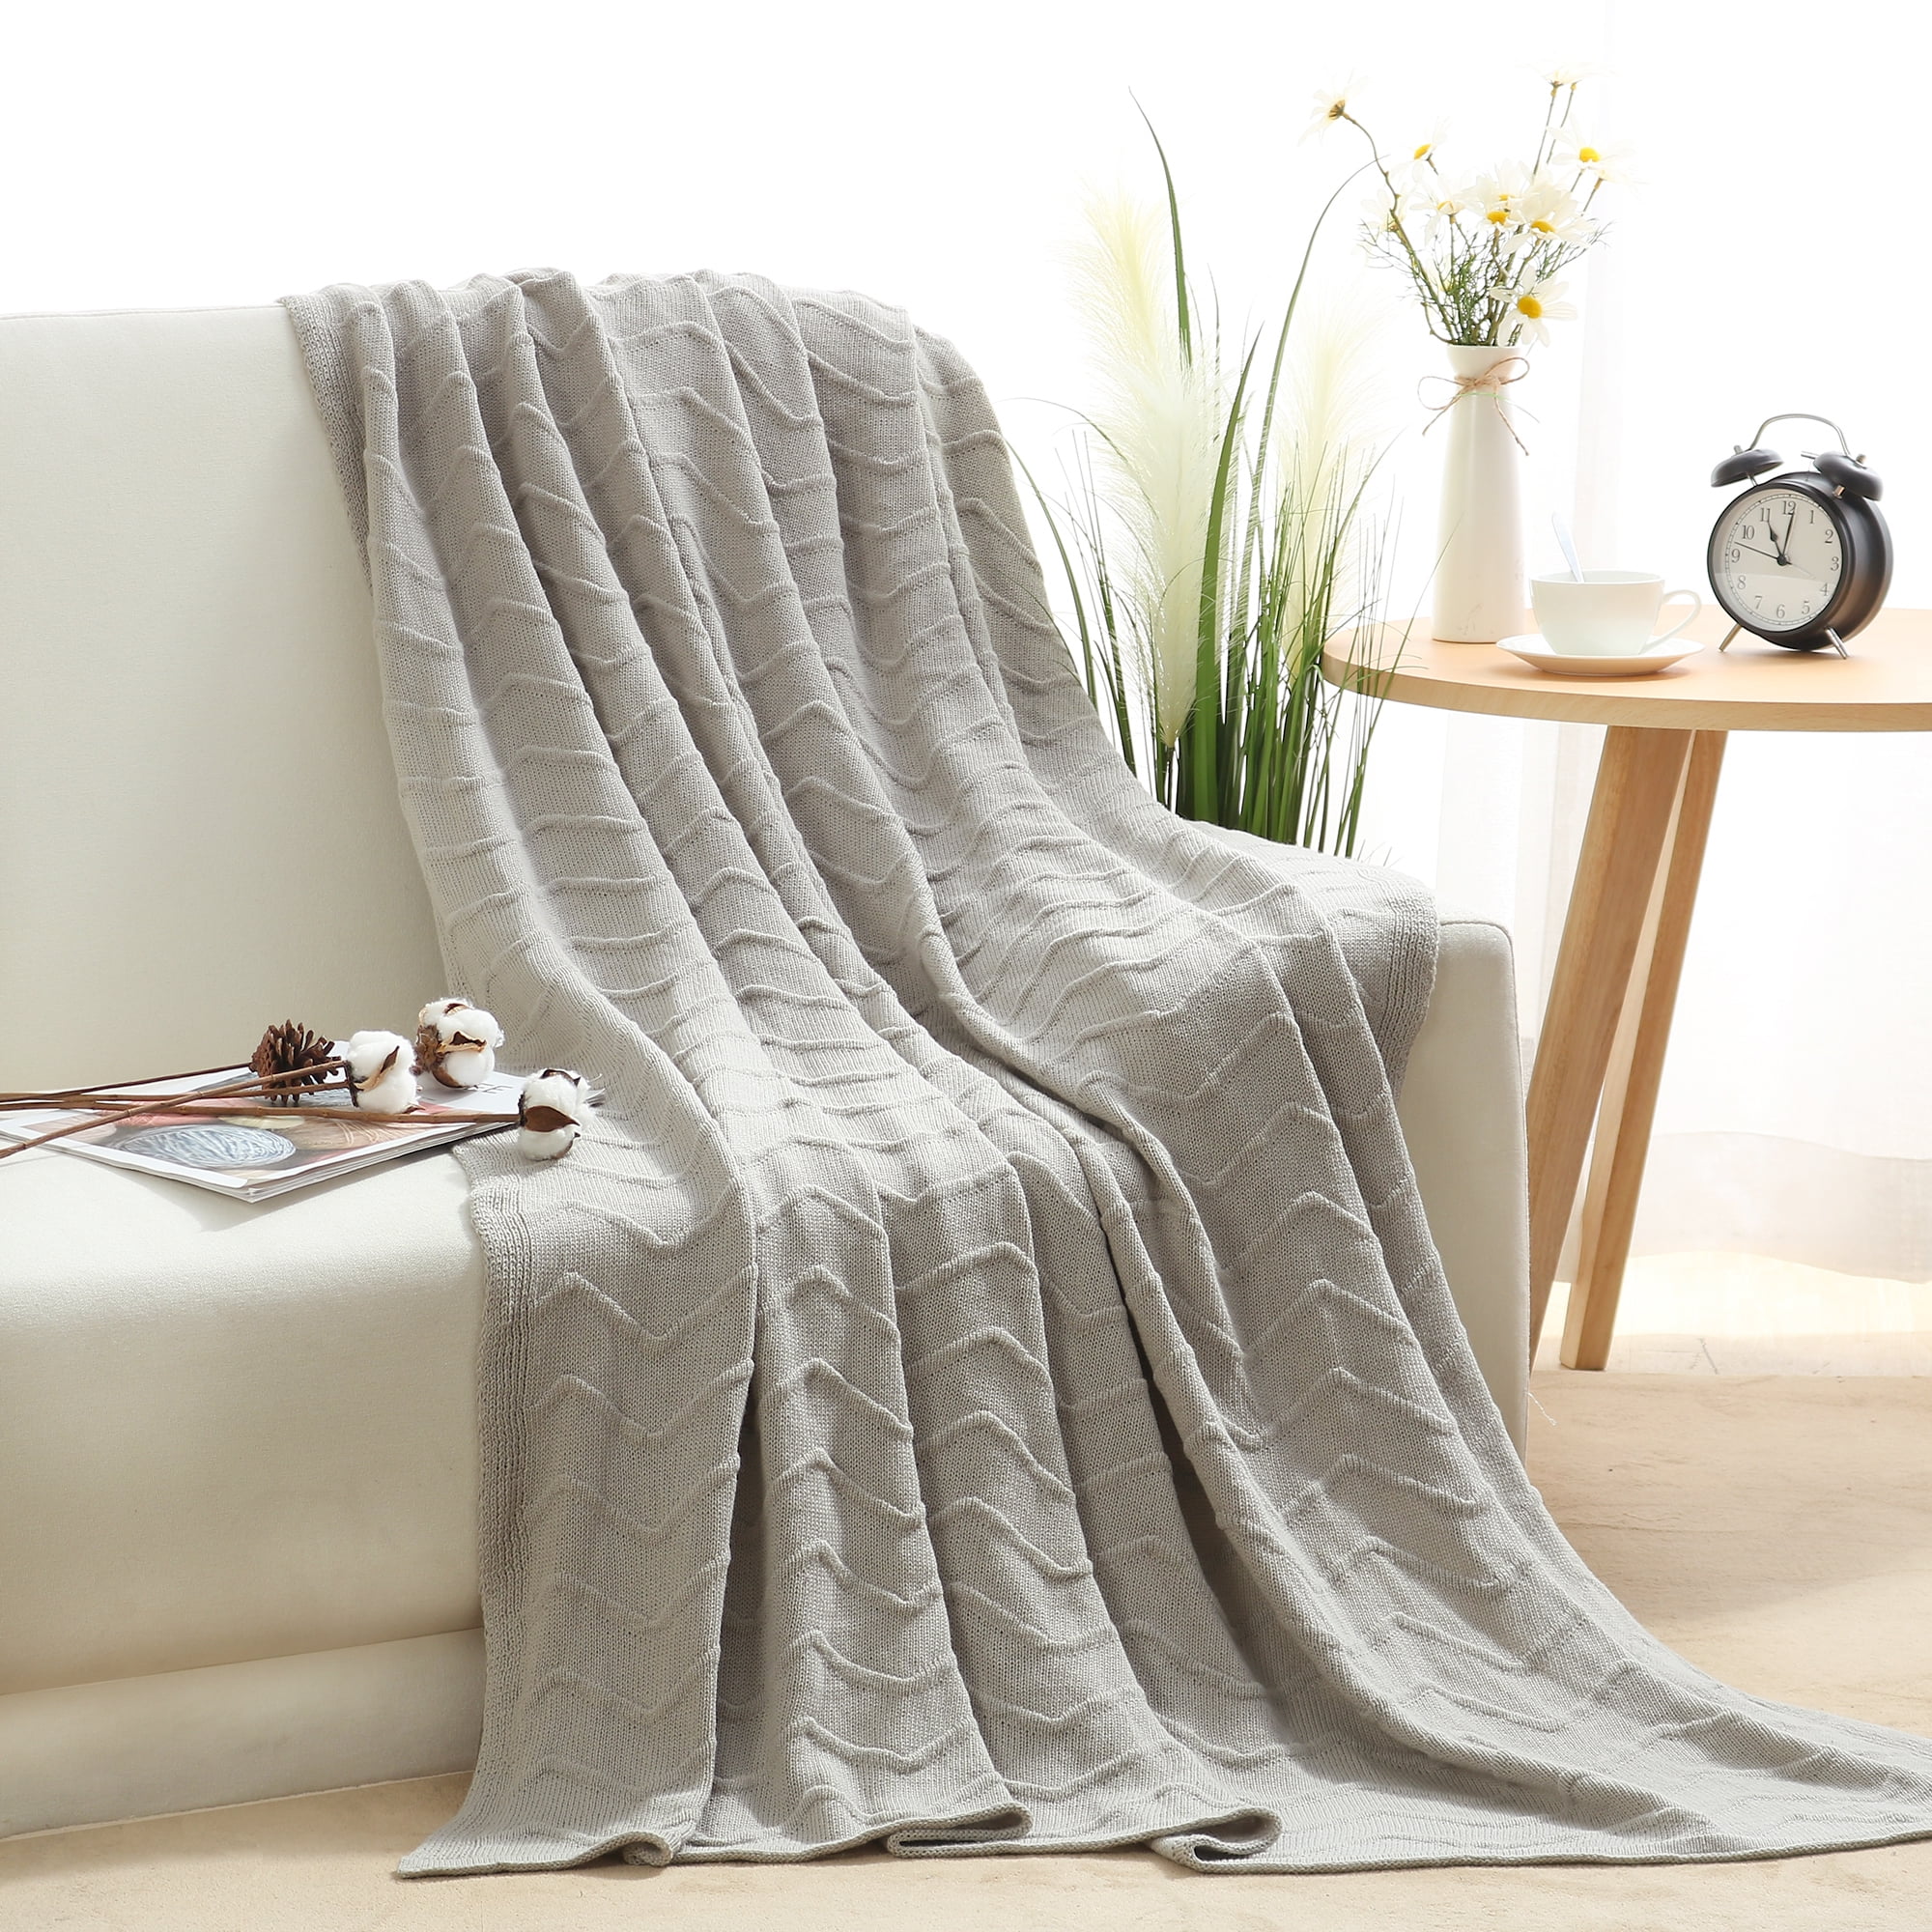 100% Cotton Soft Textured Knit Throw Blanket for Couch 50